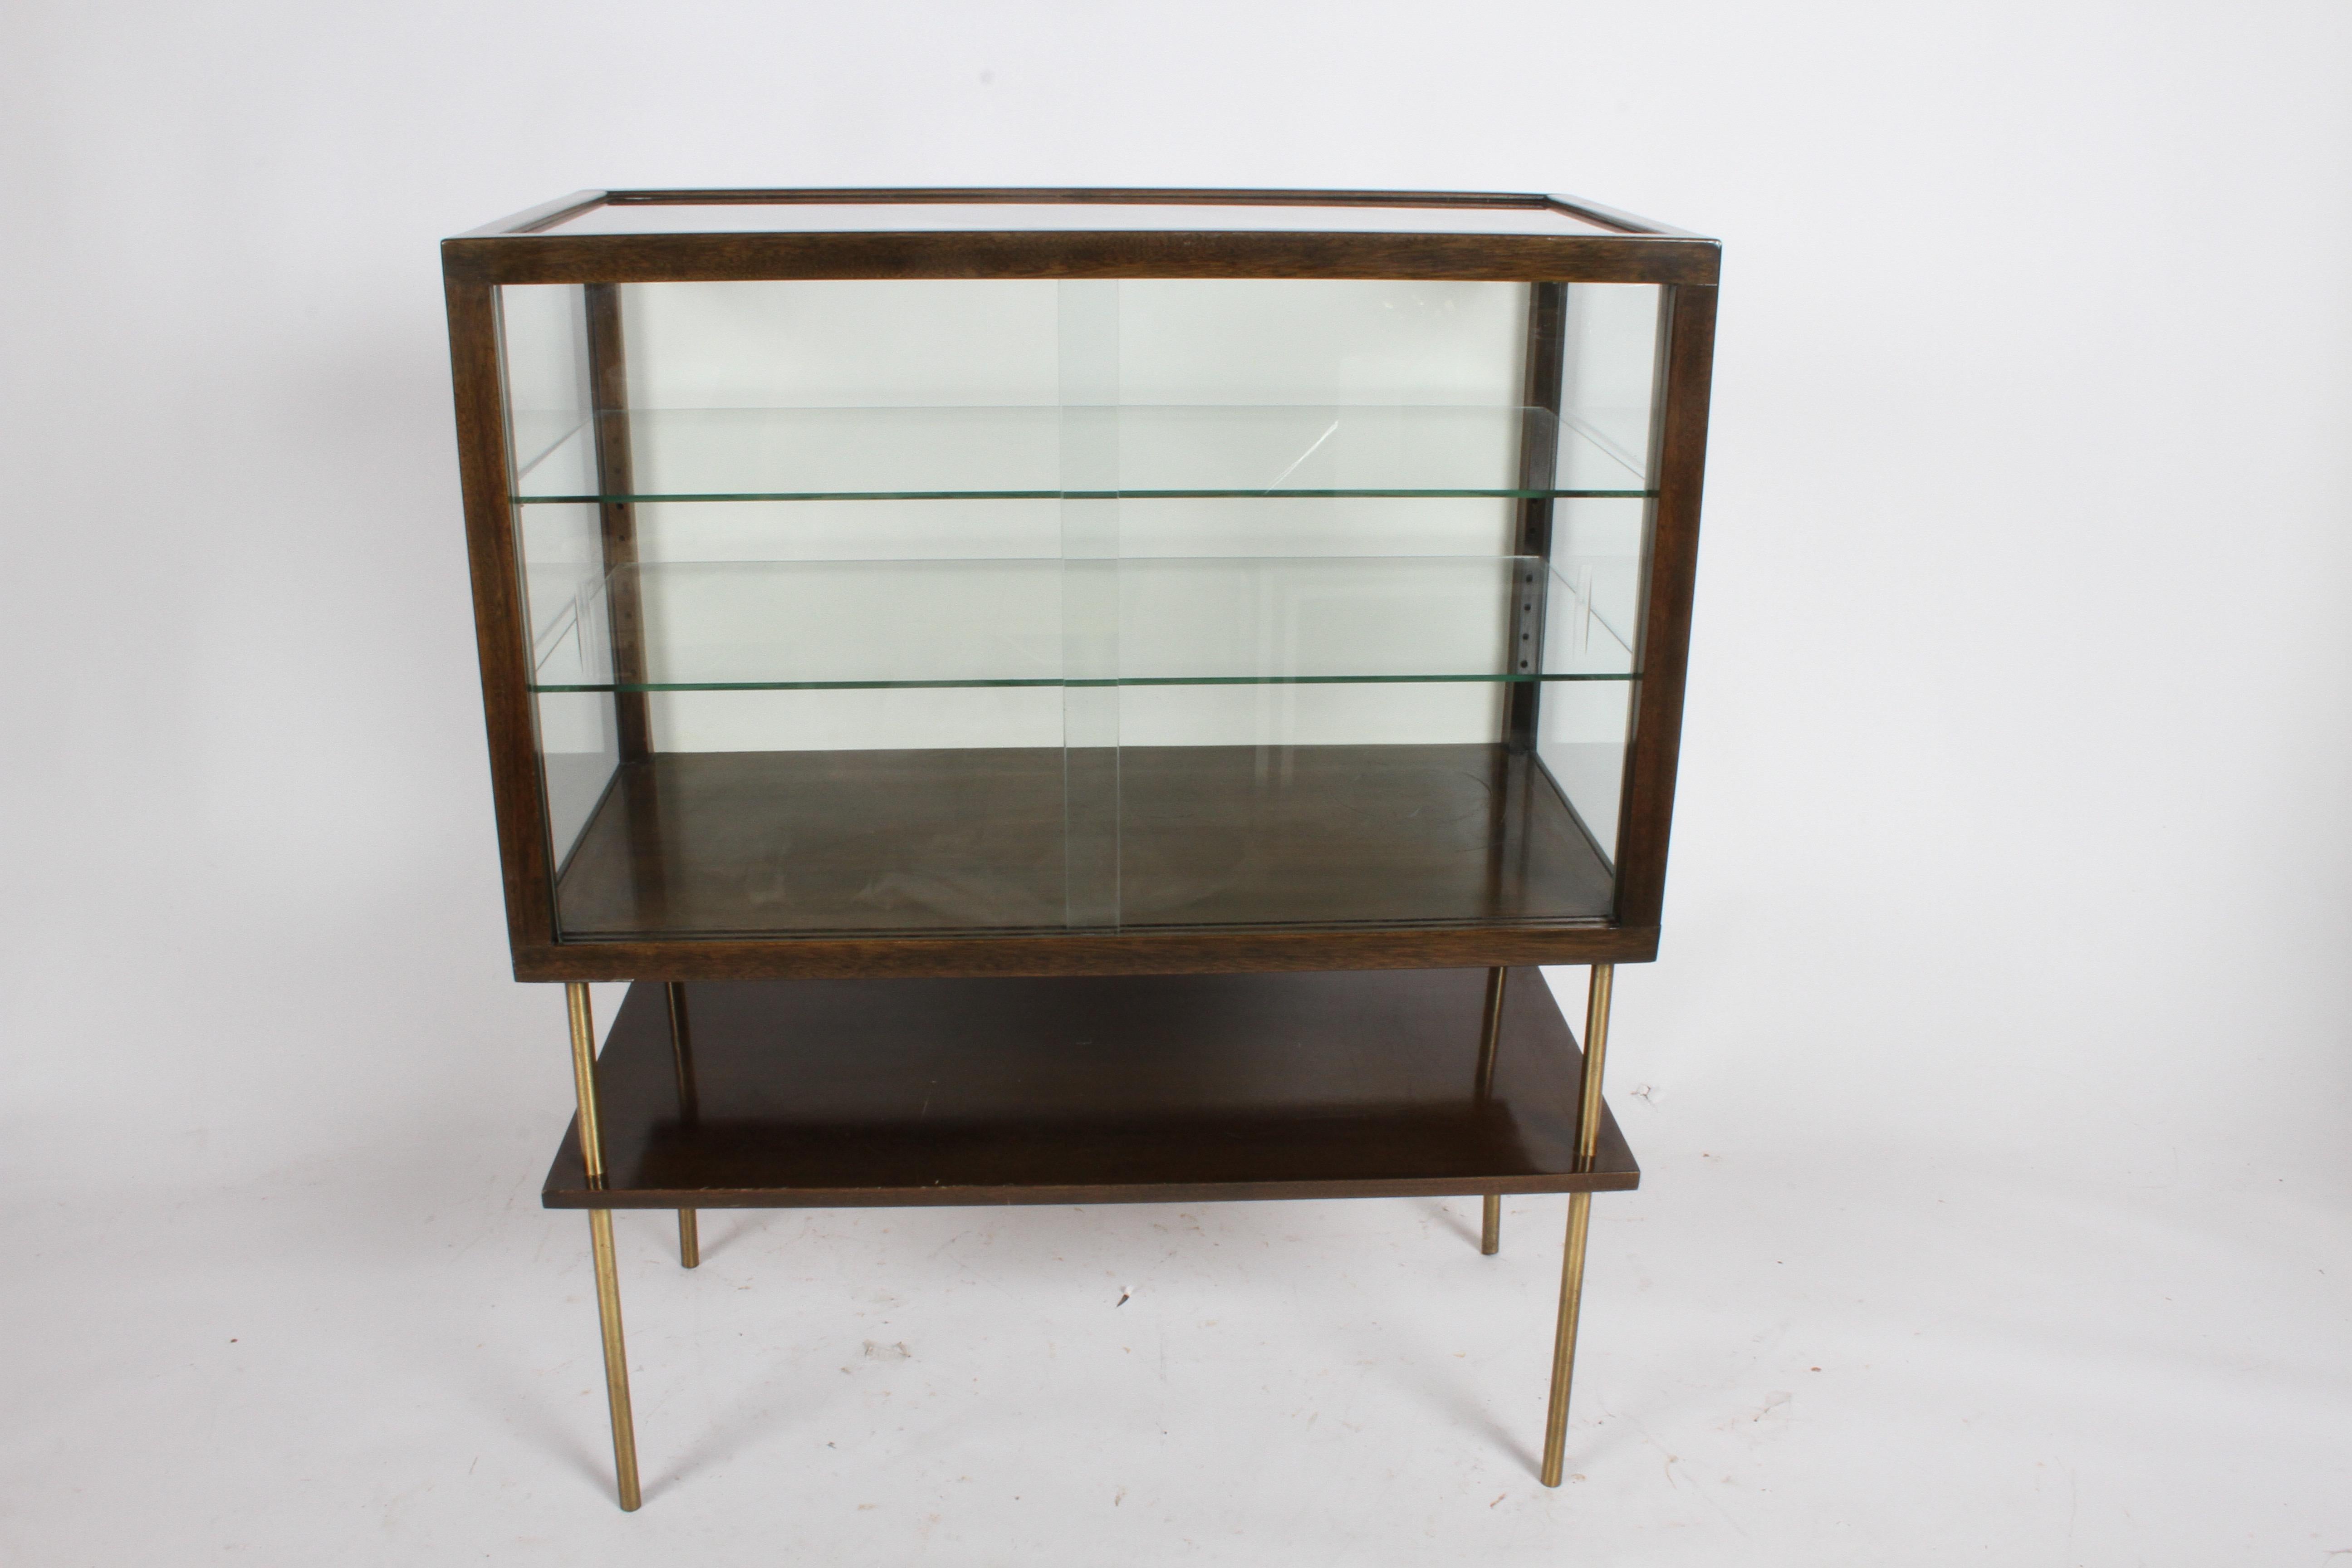 Rare Harvey Probber curio display case on brass legs. Can be used to display your collections or even used in a store setting to sell items. Also can be used as a bar to display your glassware , shakers etc. Has two sliding doors with cut recessed